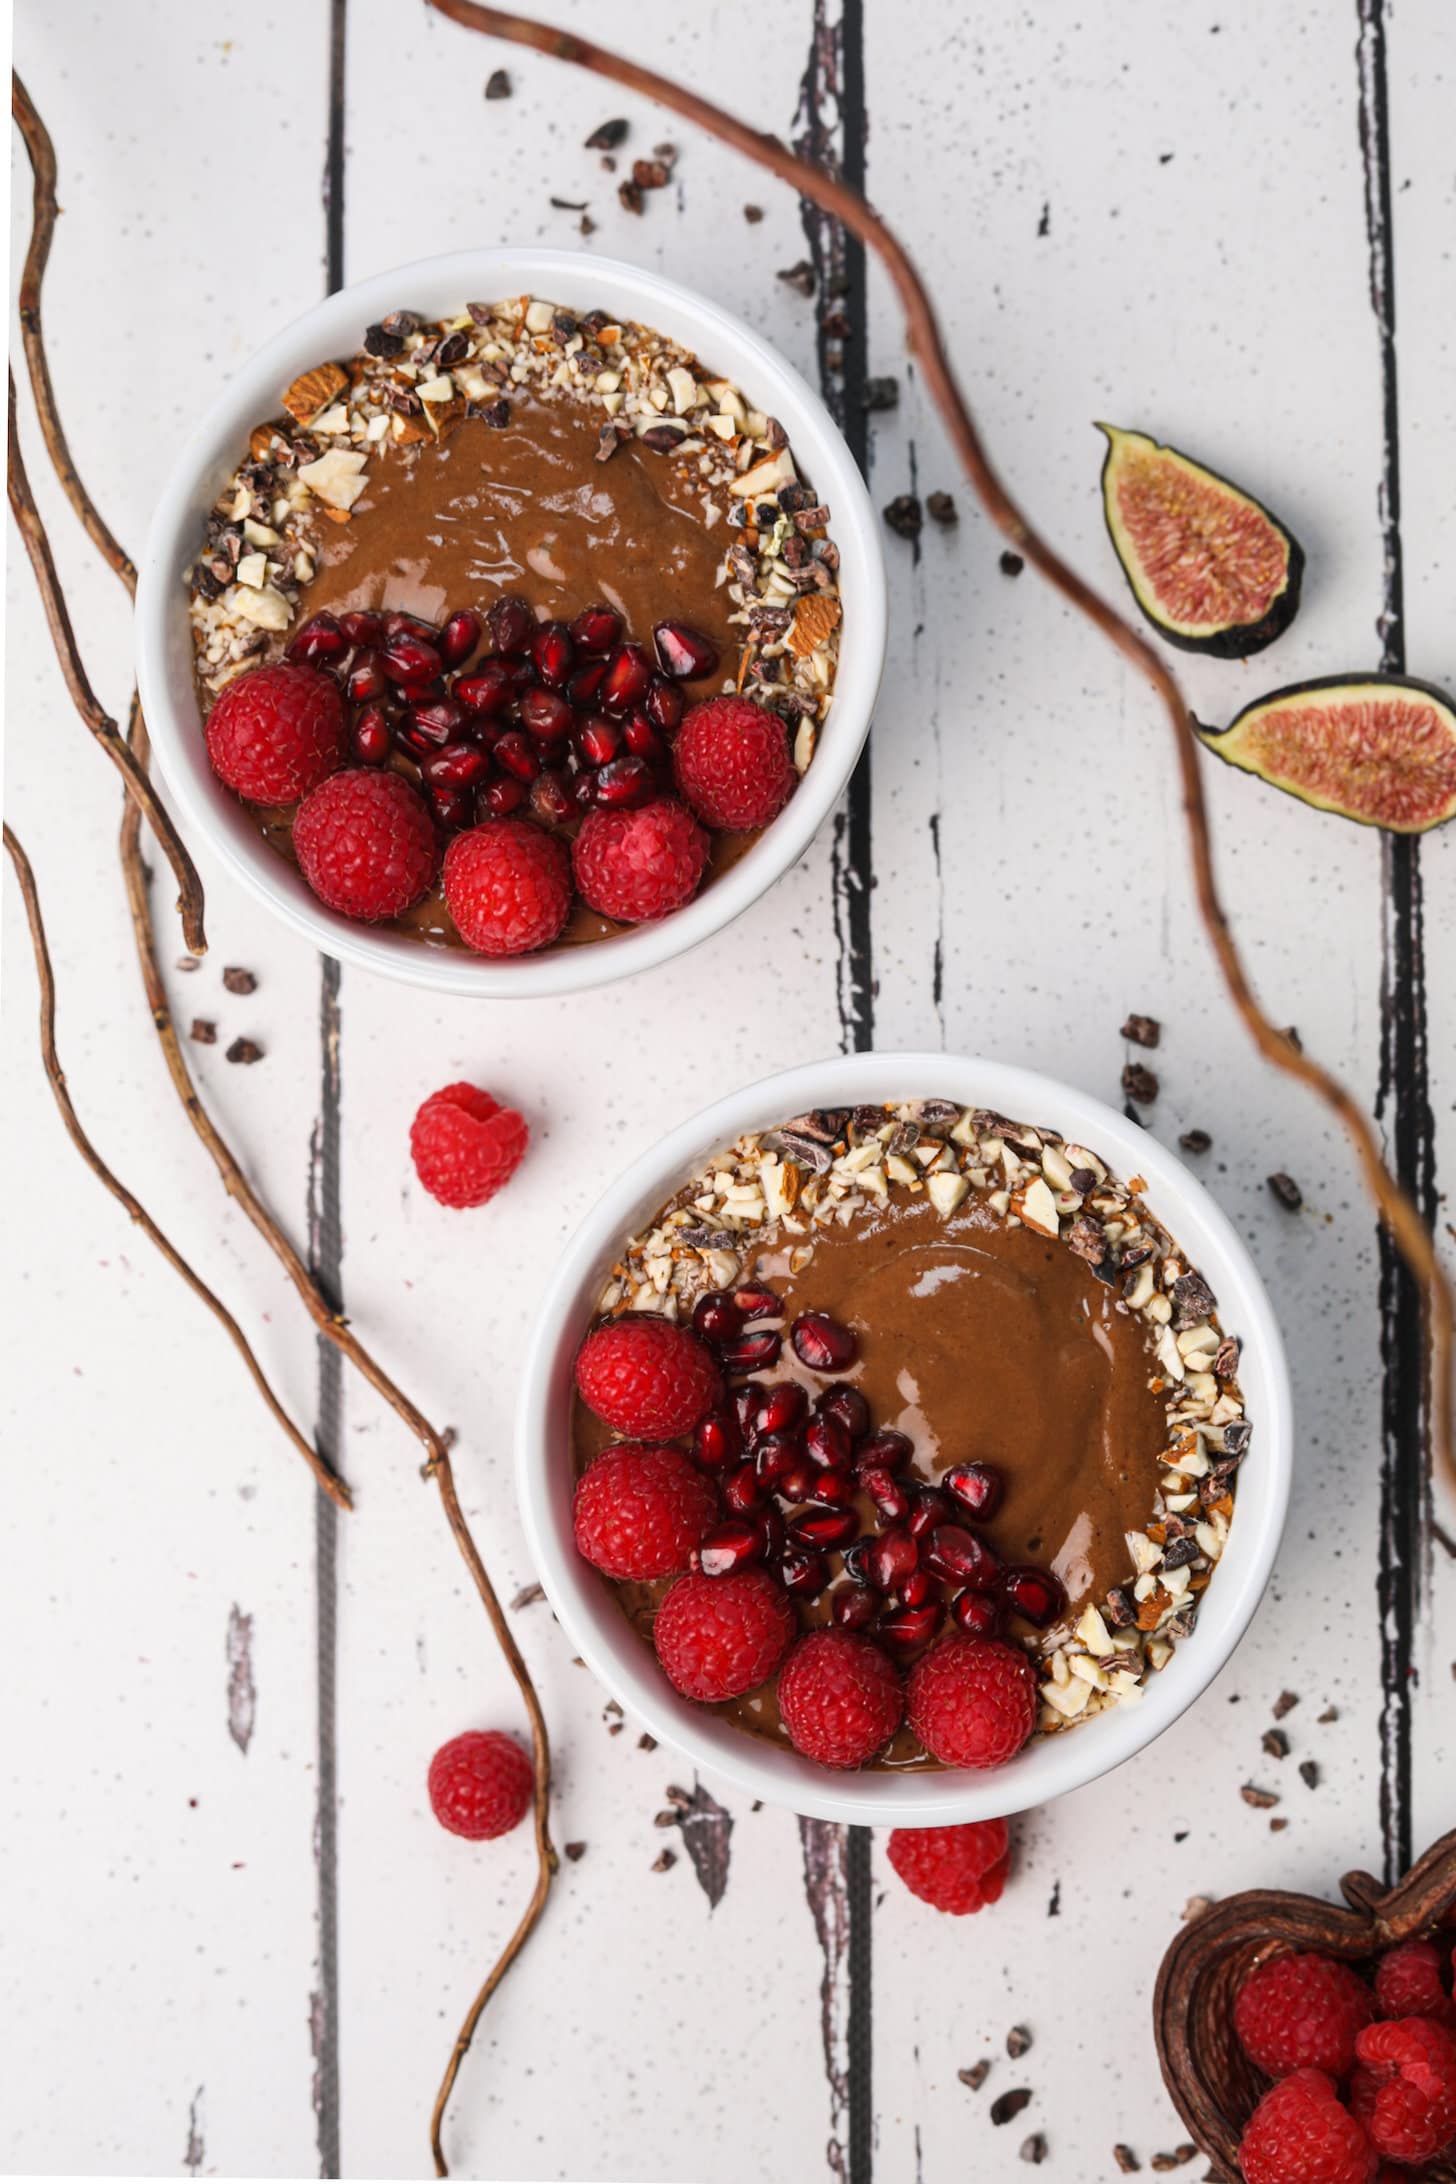 Flatlay image of 2 bowls of chocolate smoothie topped with berries, crushed nuts and pomegranate seeds.